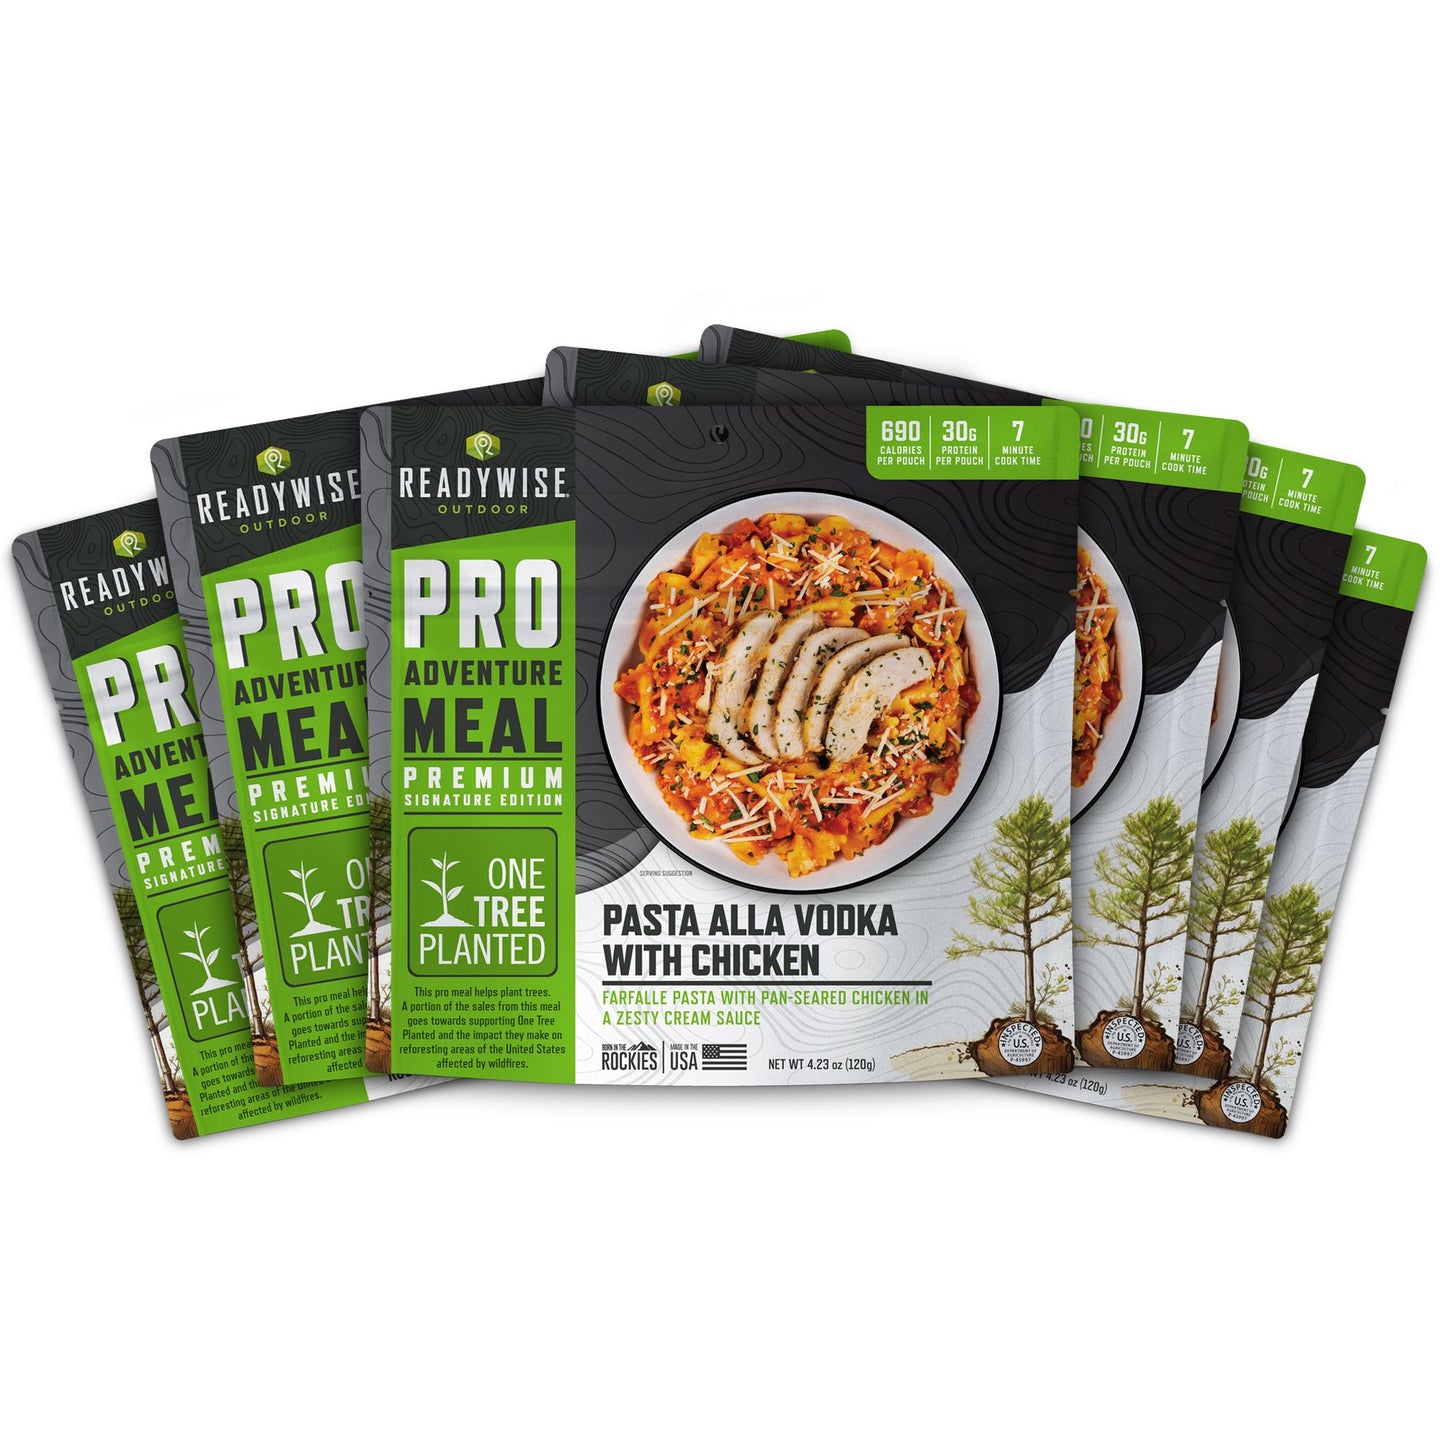 ReadyWise Pro 6 Pack Adventure Meal Pasta Alla Vodka with Chicken